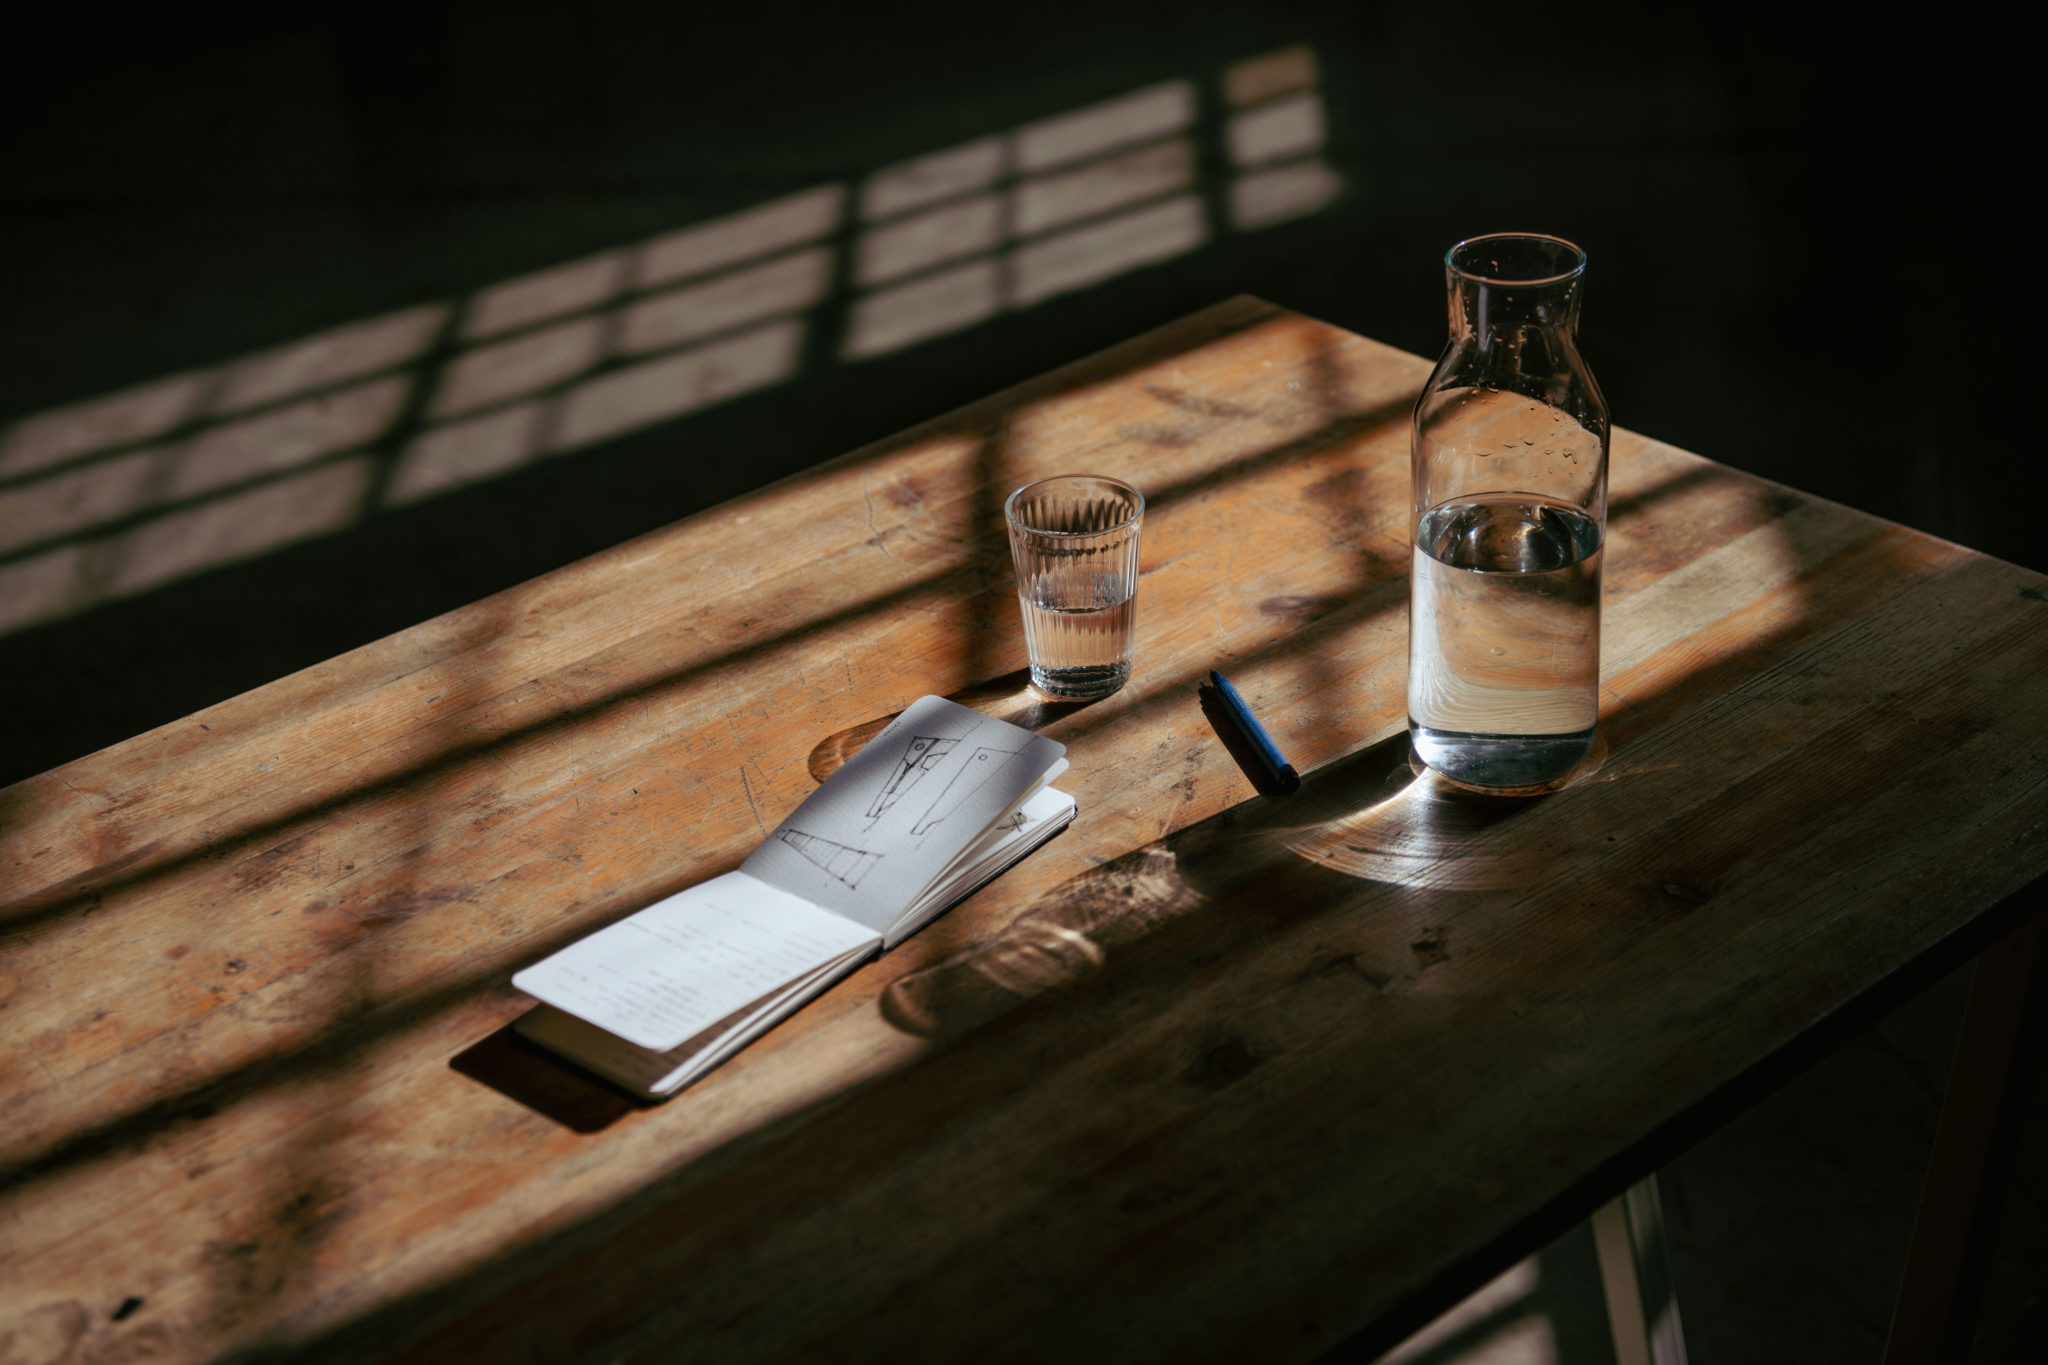 A notepad, water pitcher, and a water glass on a table.